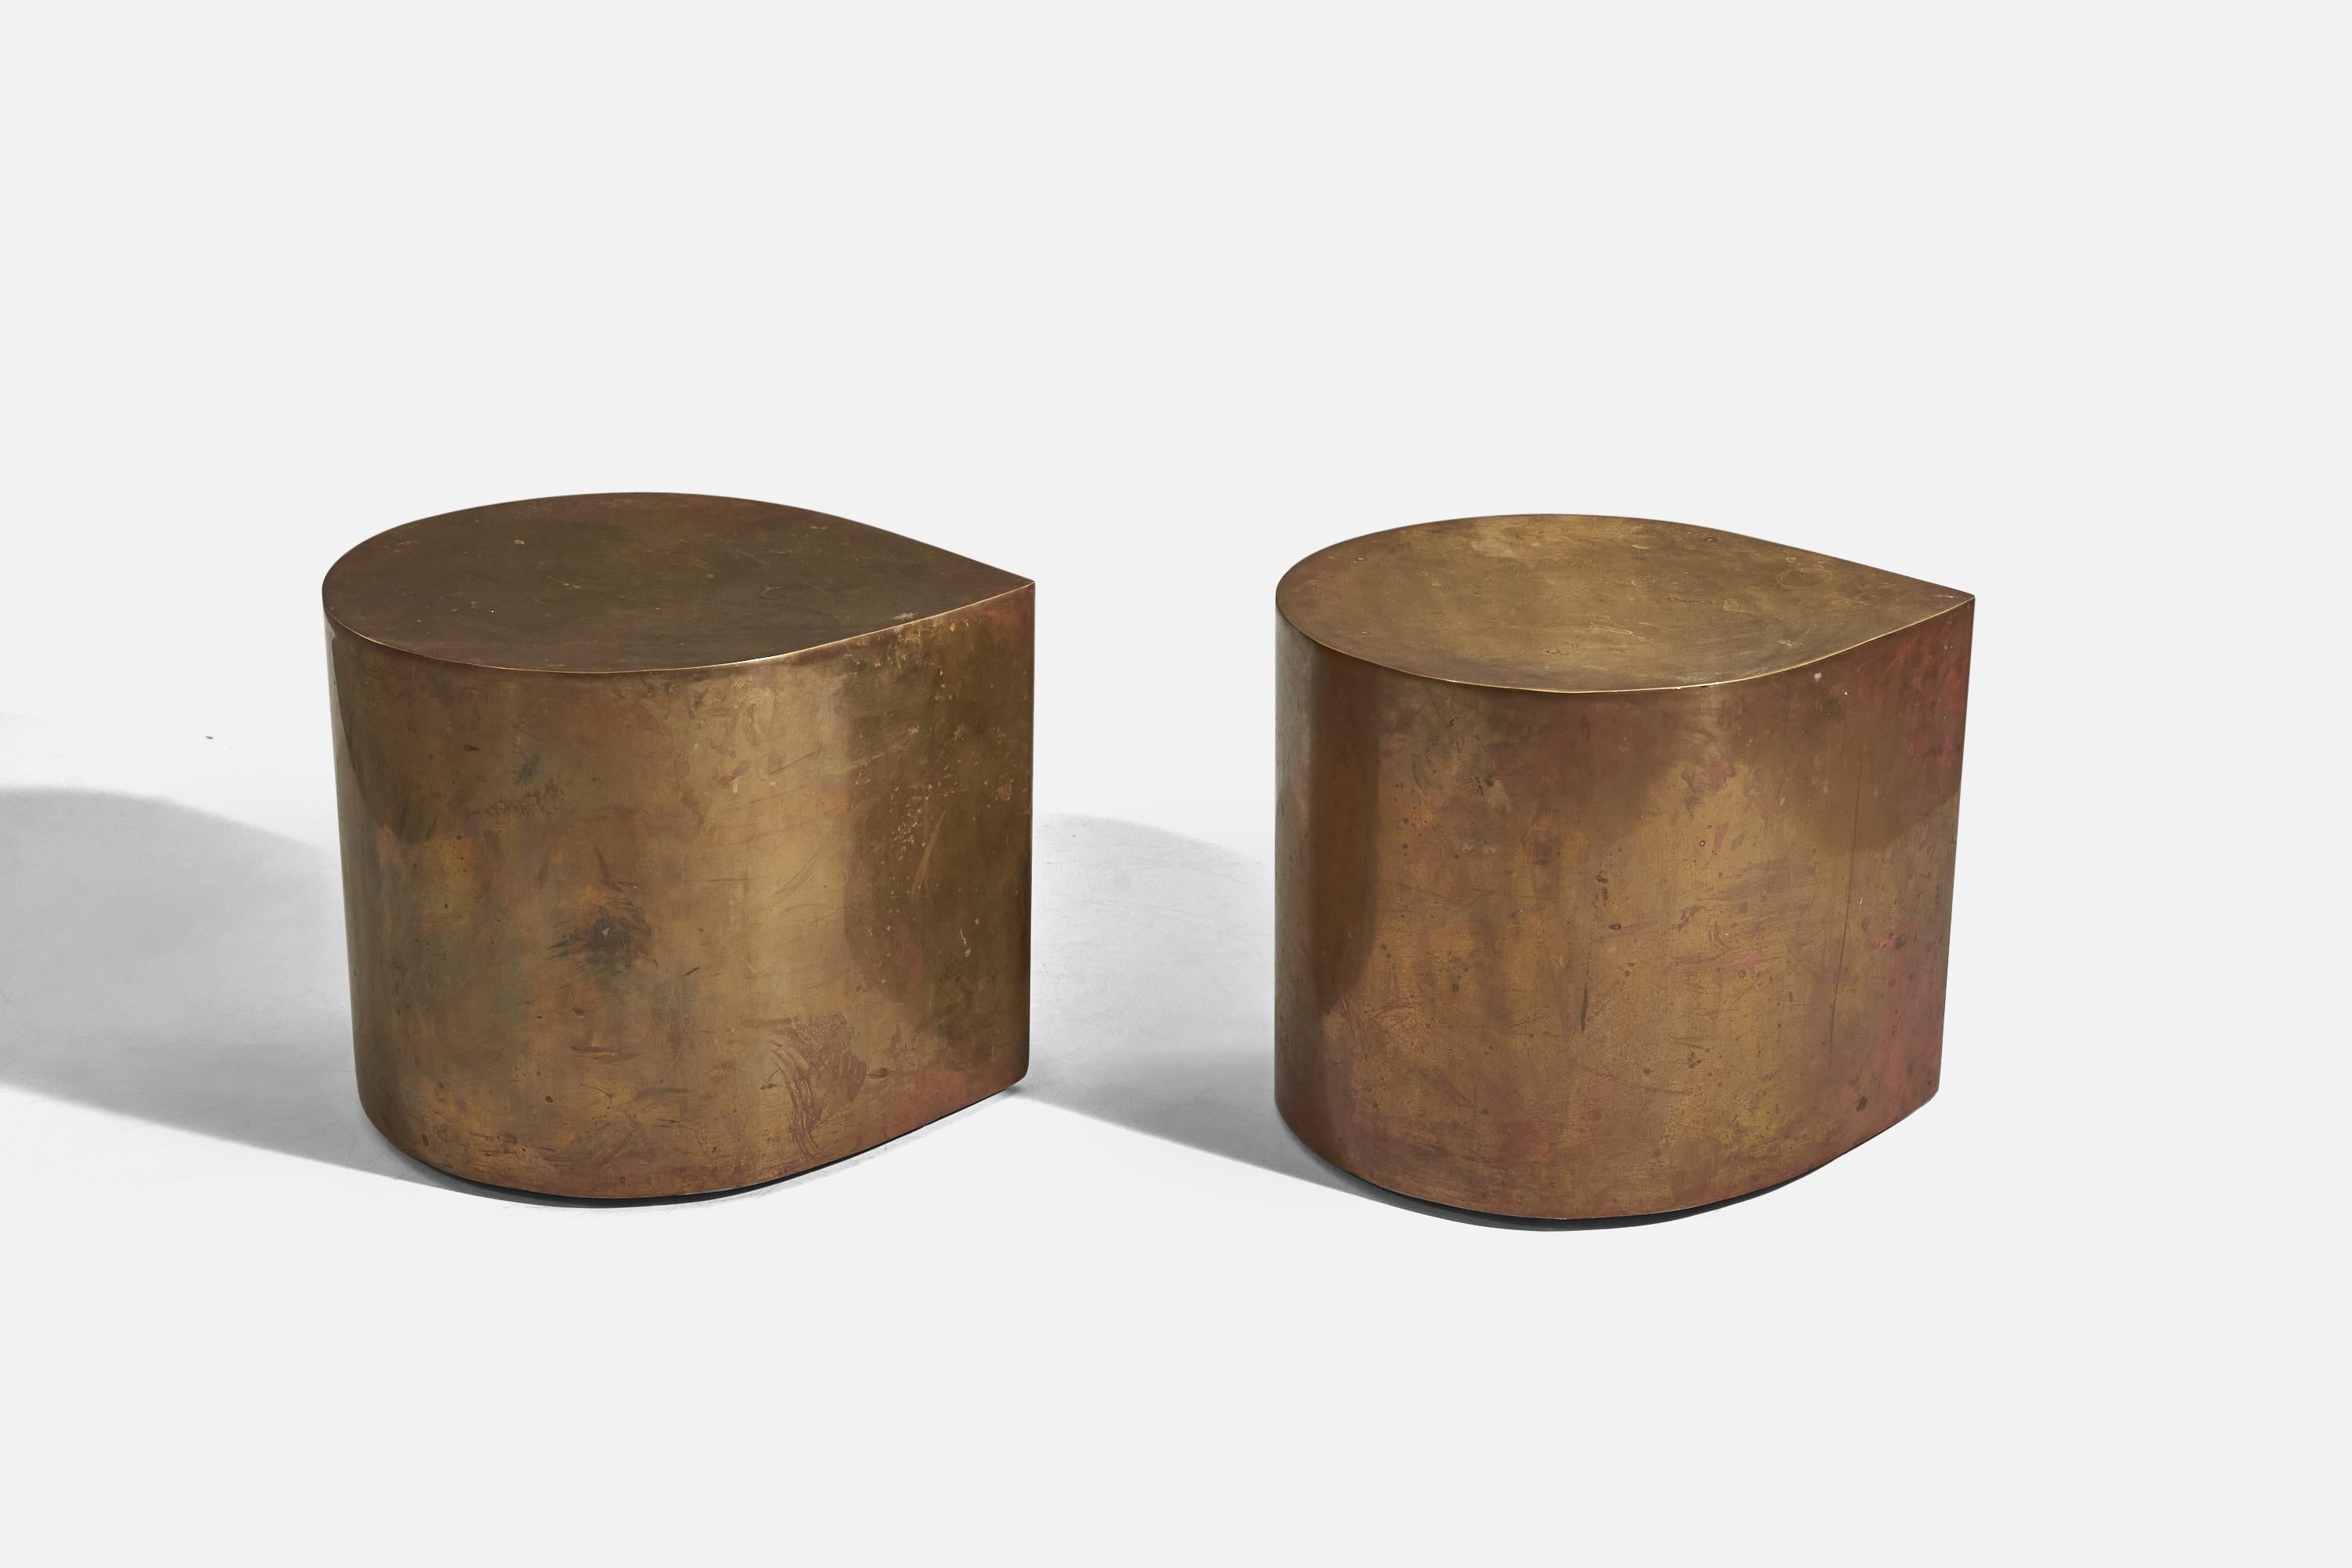 A pair of brass side tables designed and produced in America, c. 1970s.